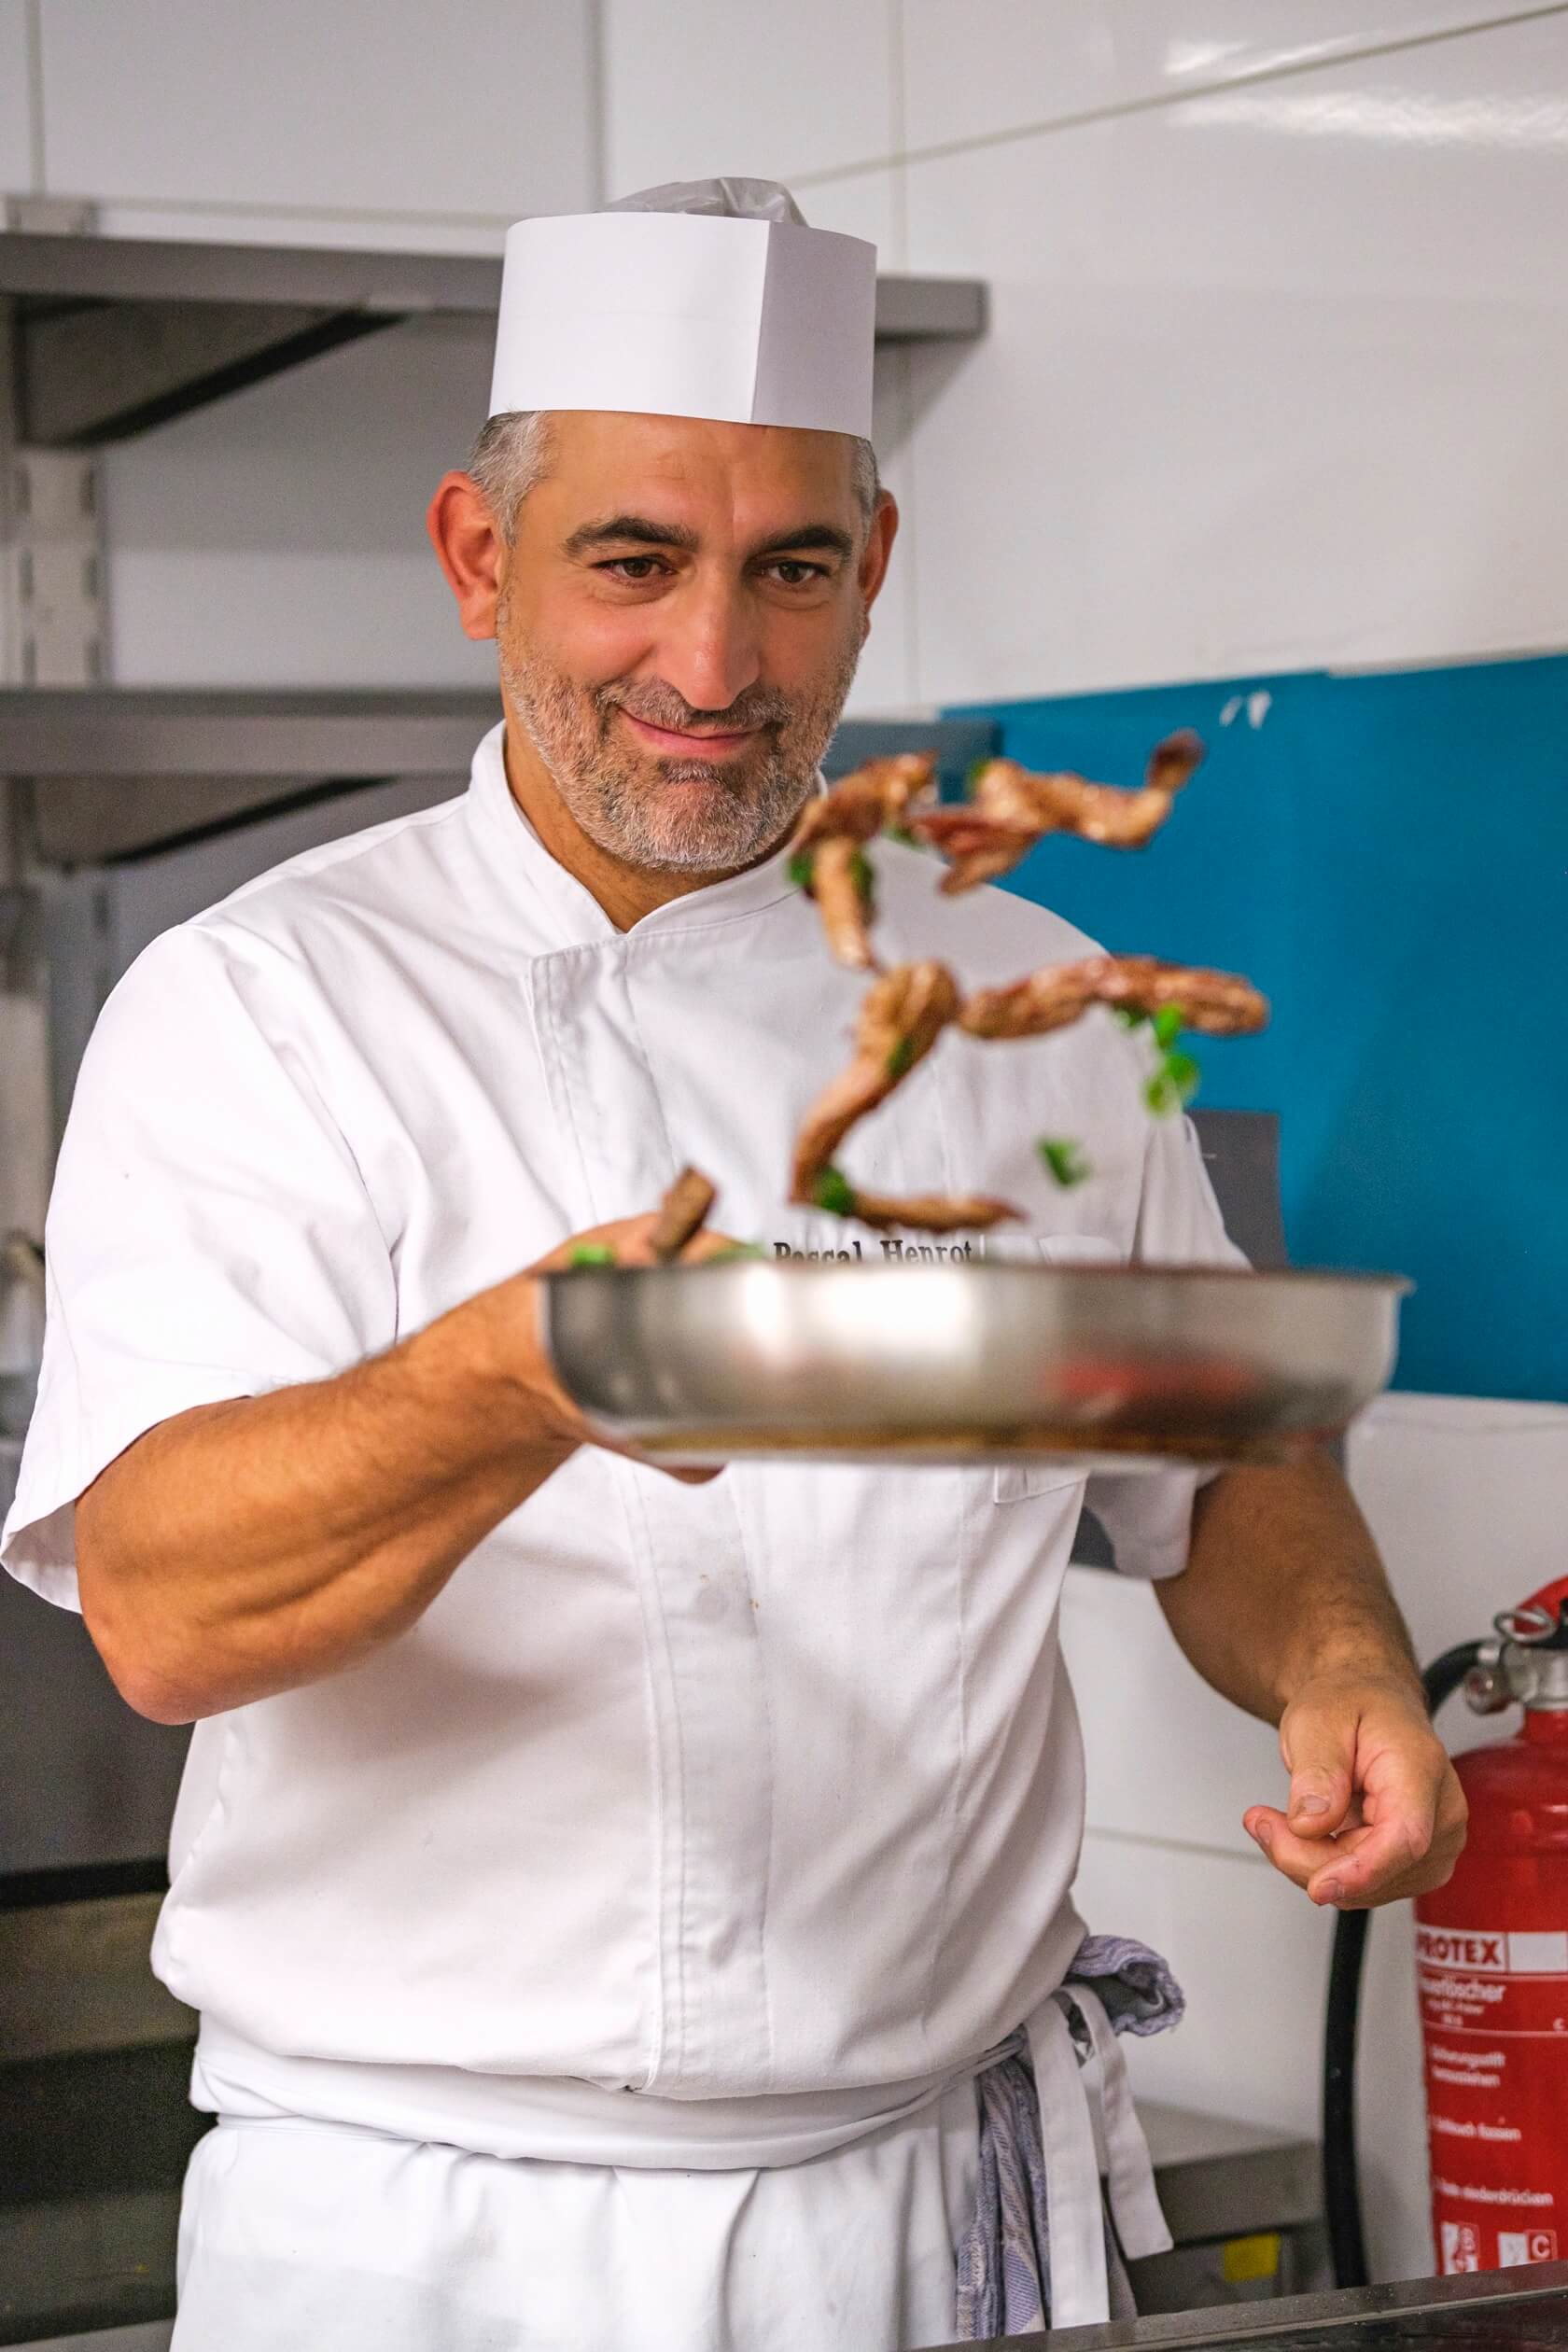 chef-pascal-henrot-frying-food-foozo-kitchen